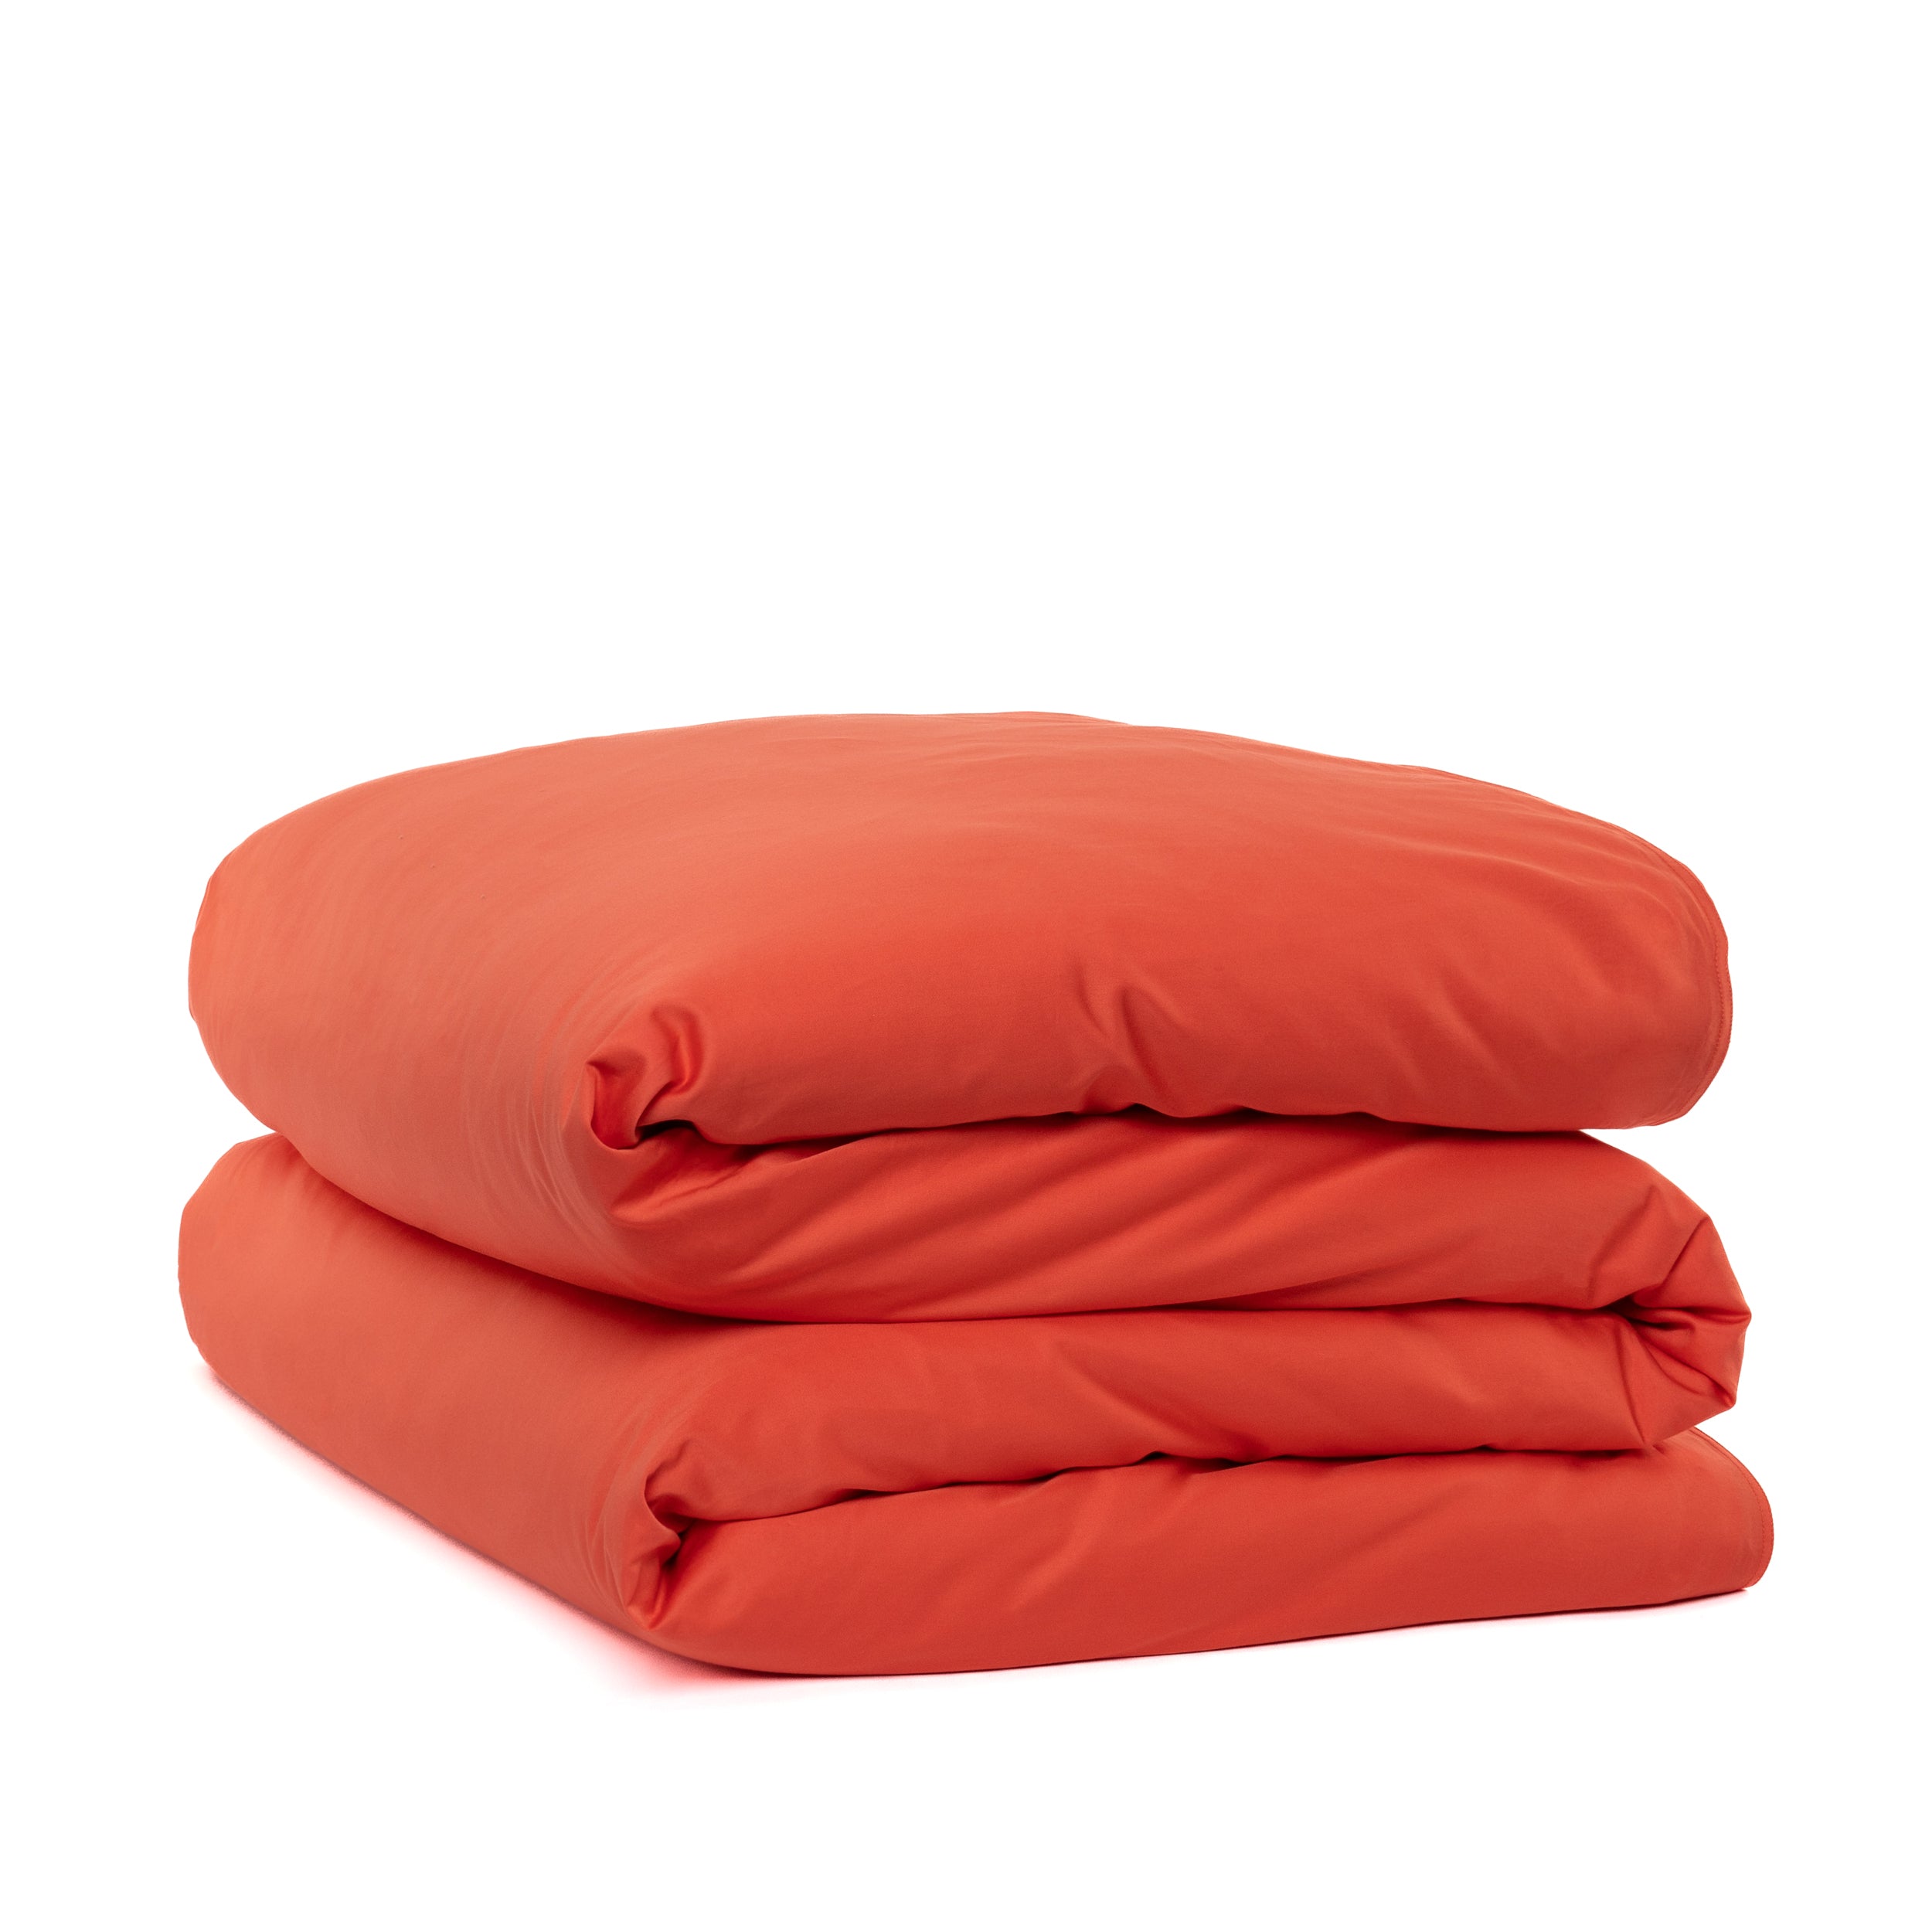 CANADIAN DOWN & FEATHER COMPANY Persimmon Duvet Cover